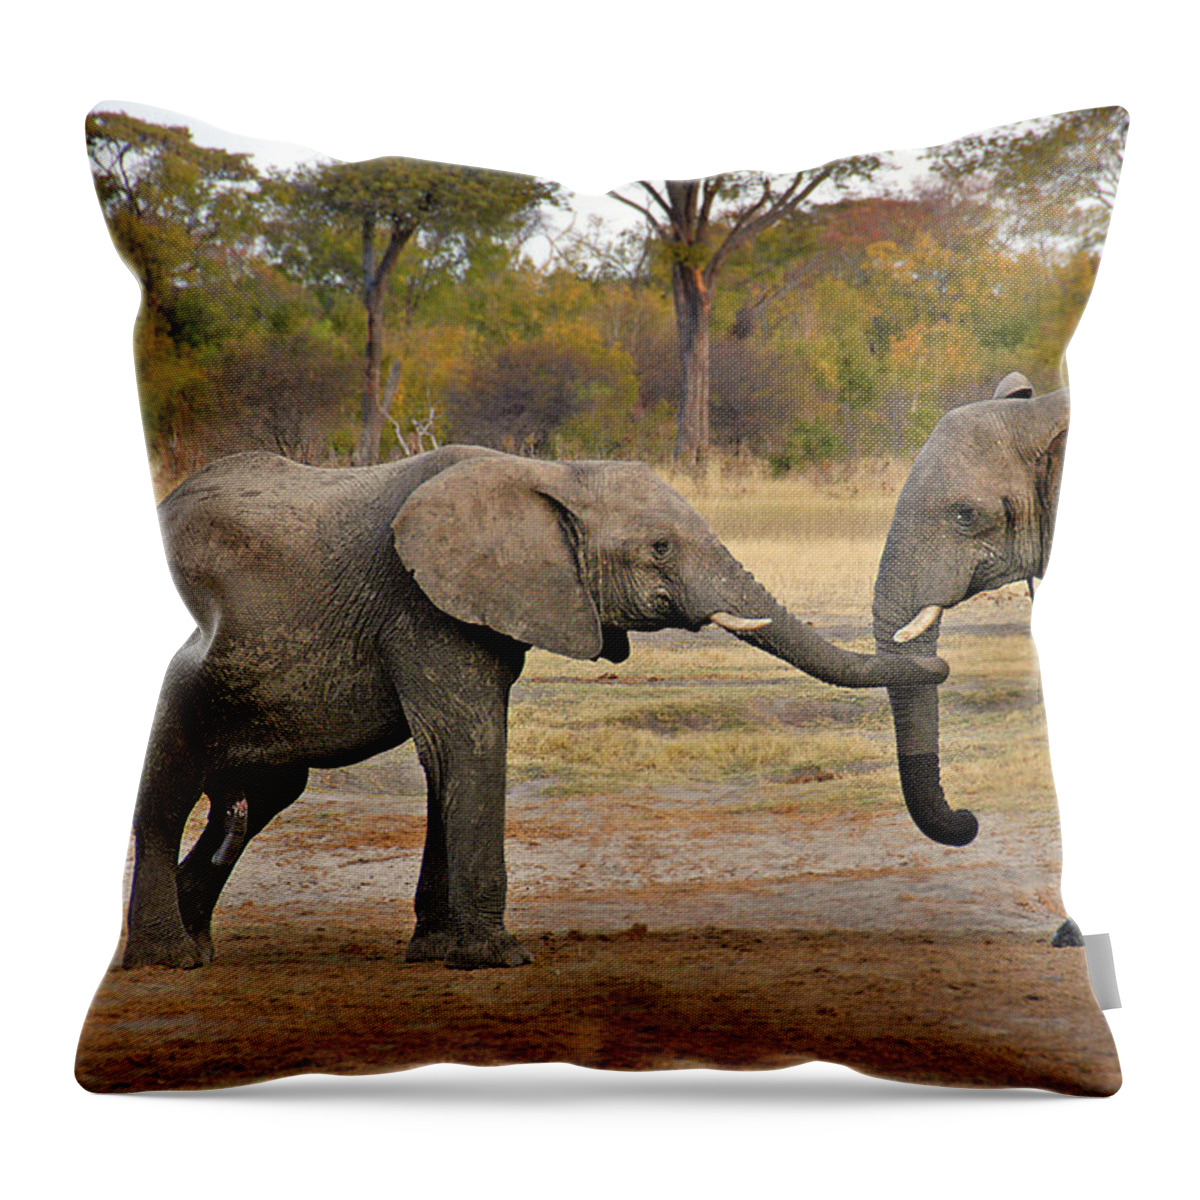 Elephant Throw Pillow featuring the photograph Elephant Greeting by Ted Keller